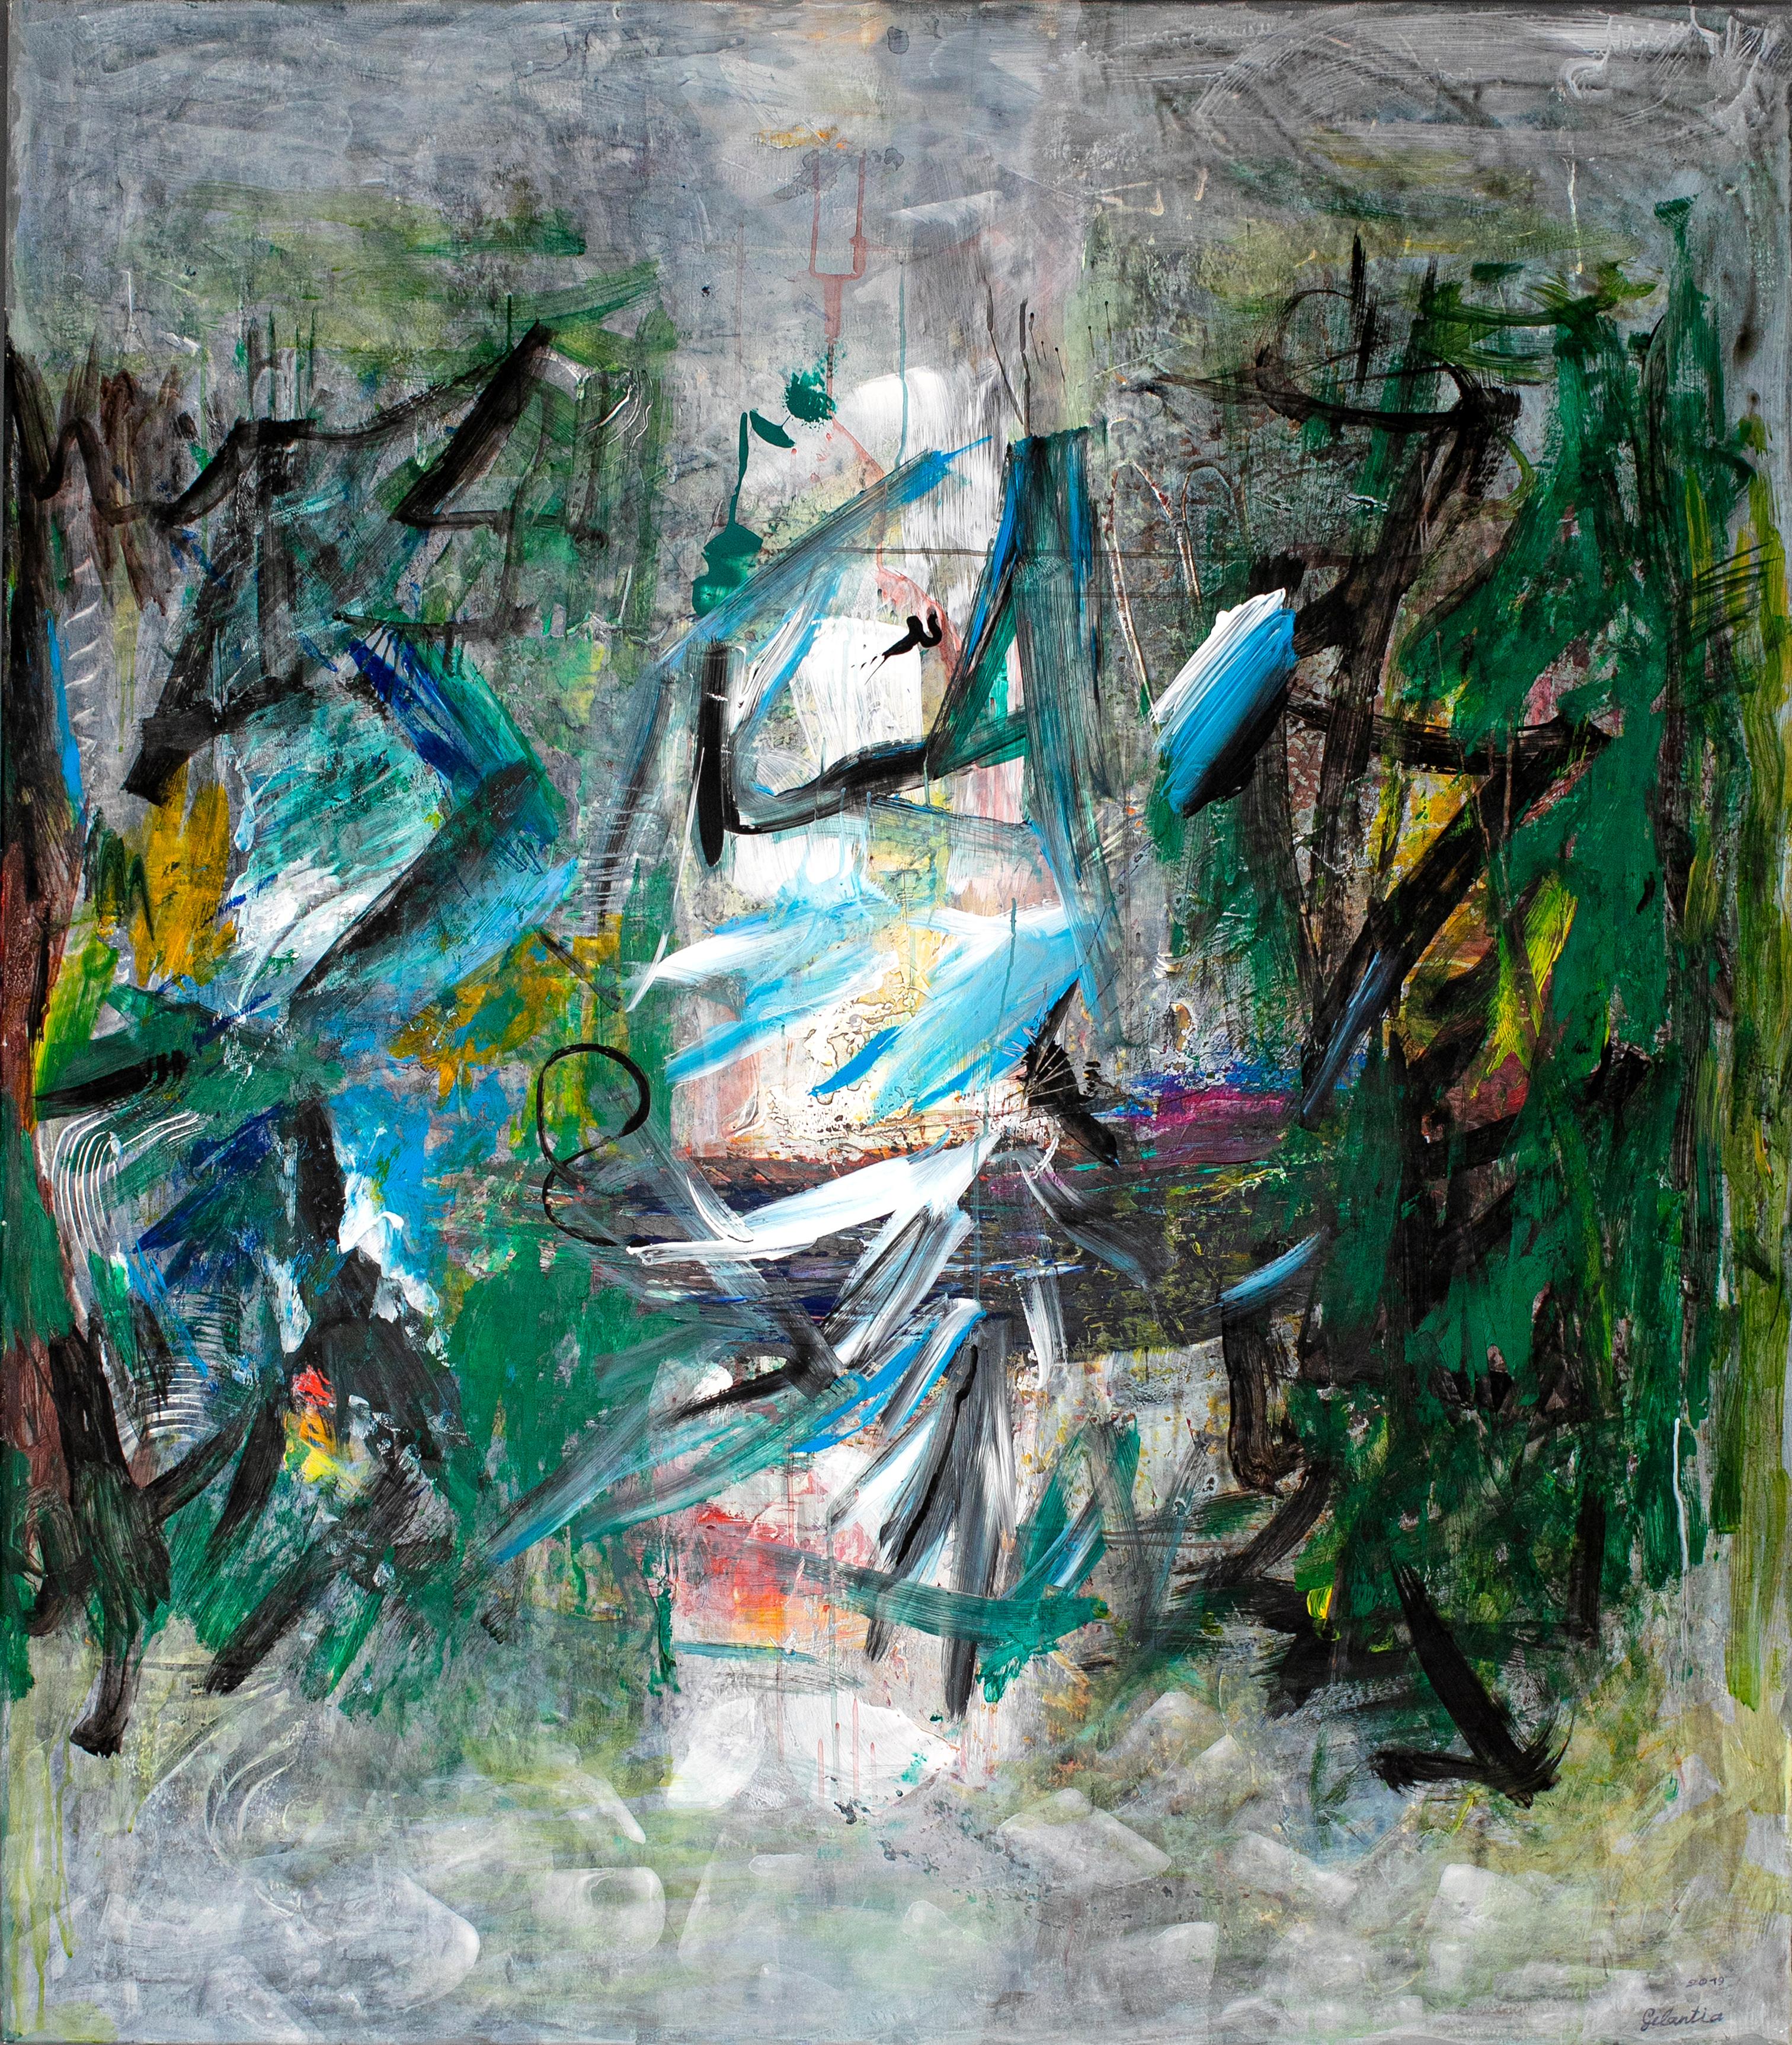 Gogi Gelantia Abstract Painting - Abstraction - Painting, 21st Century, Abstract, Acrylic, Green, Brushstrokes